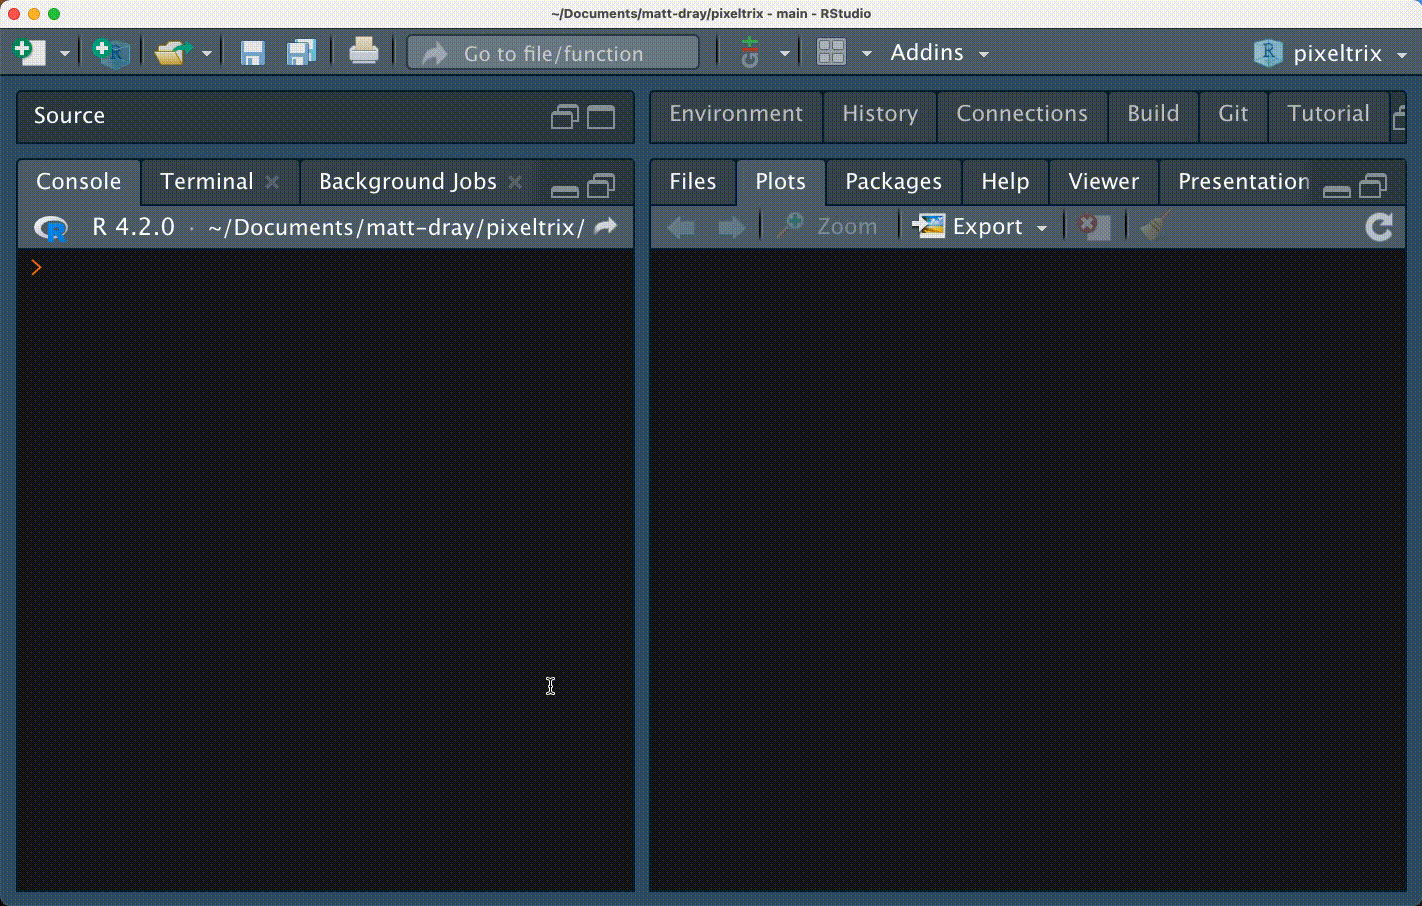 Gif of RStudio window. The console is running the code pixeltrix::click_pixels(6, 7, 3) and a plot appears with a 6 by 7 square grid. Some squares are clicked, changing them to light grey. A second click turns them dark grey. Eventually a little square character with a face is created. A matrix encoded the image is shown in the console when the escape key is pressed.